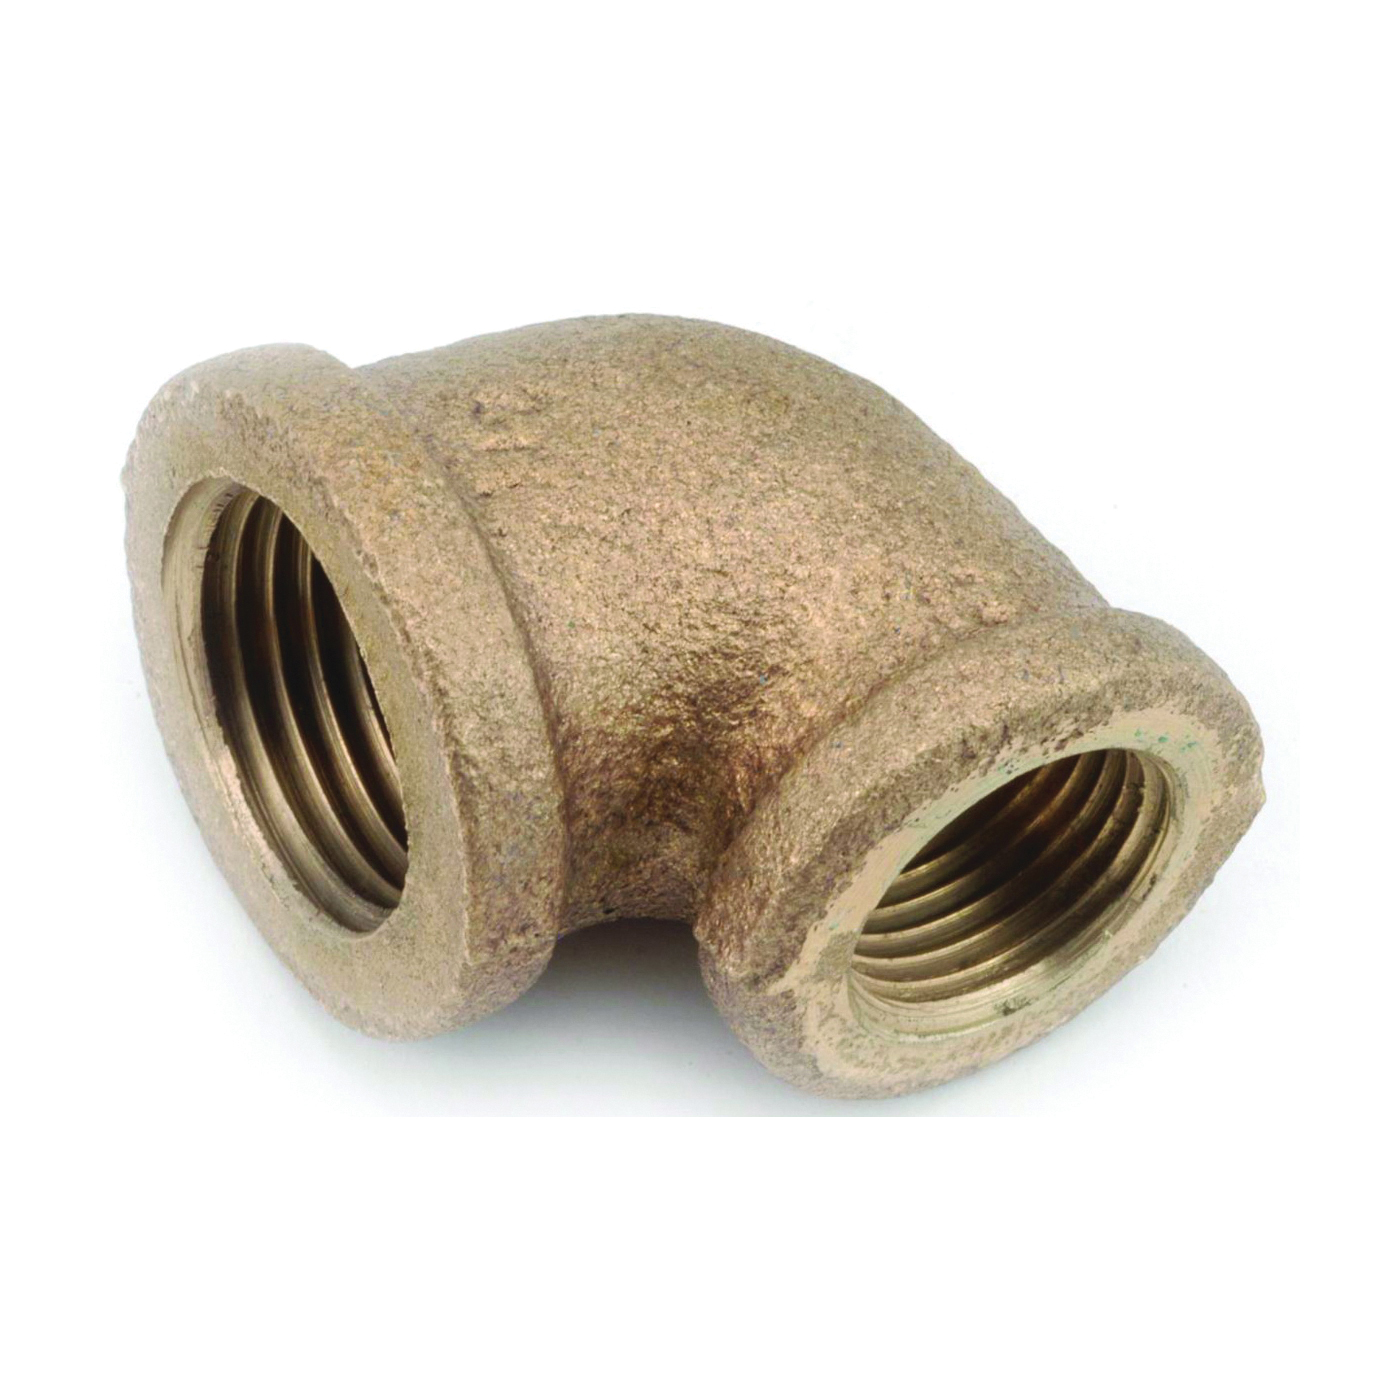 738105-0604 Reducing Pipe Elbow, 3/8 x 1/4 in, FIP, 90 deg Angle, Brass, 200 psi Pressure